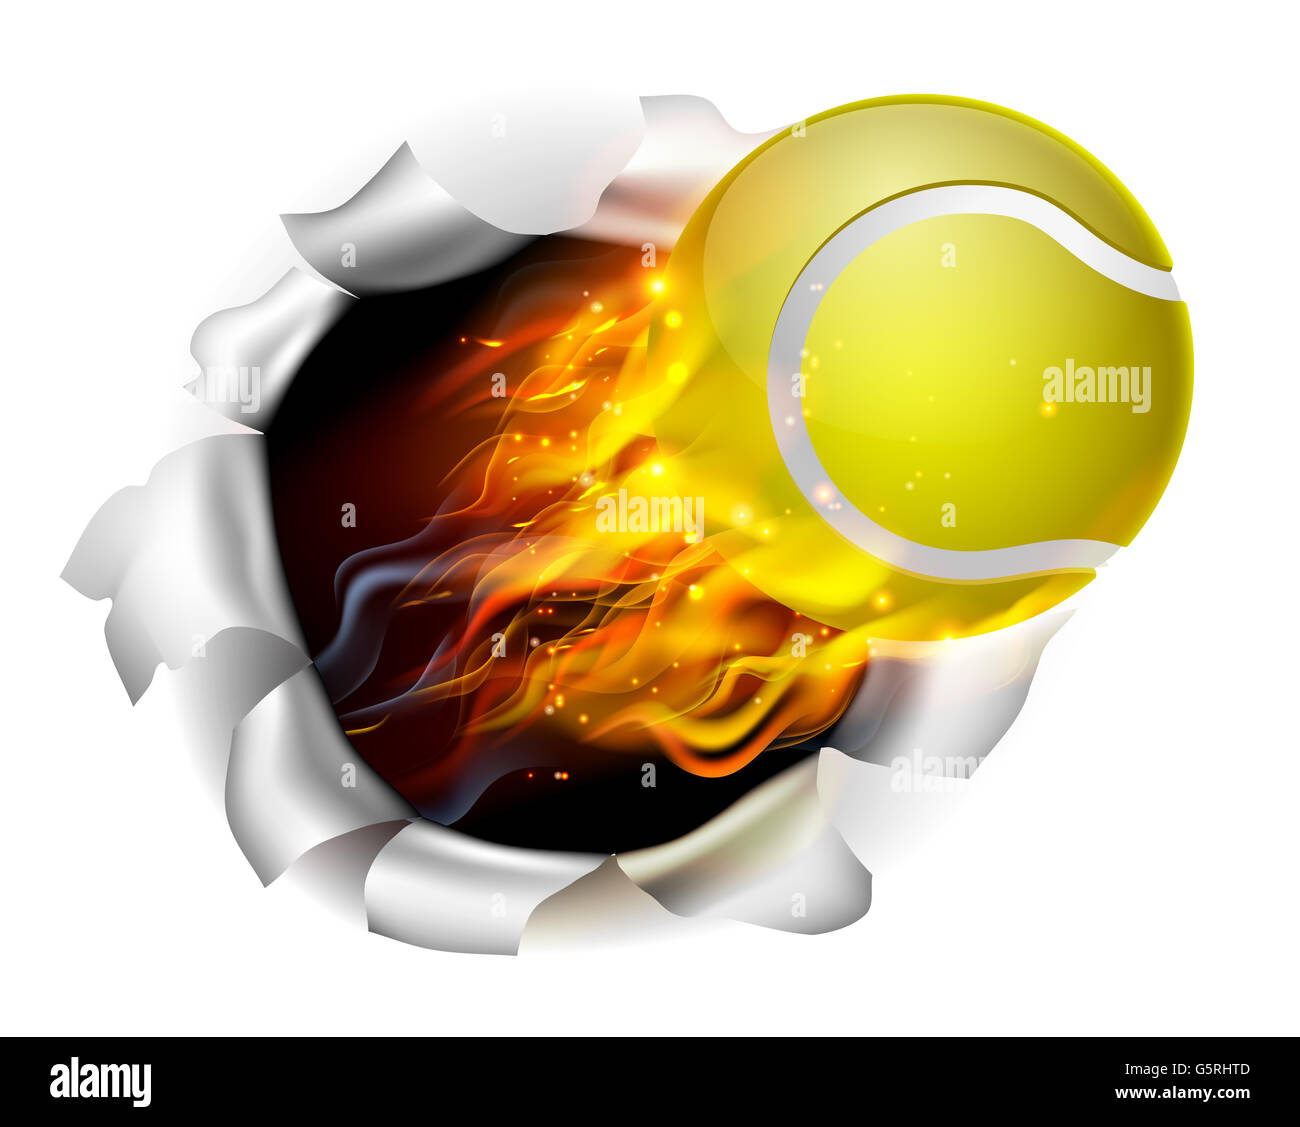 An illustration of a burning flaming tennis ball on fire tearing a hole in the background Stock Photo